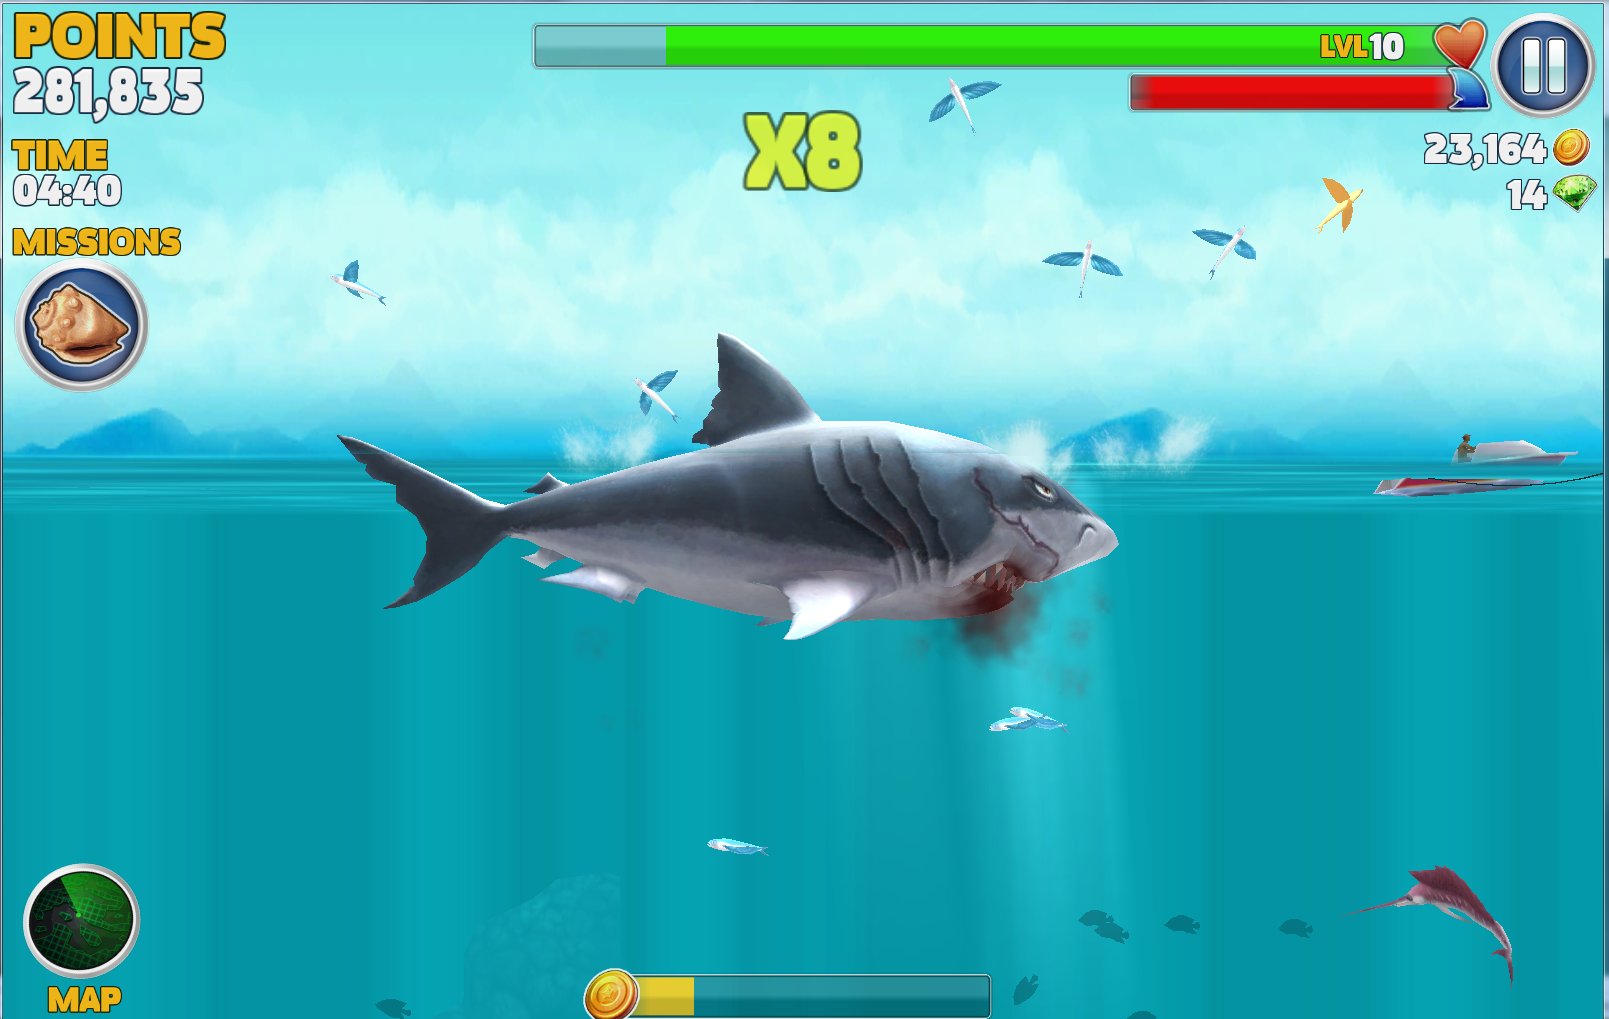 Hungry Shark on X: It's #megalodonmonday and #leapday!! To win